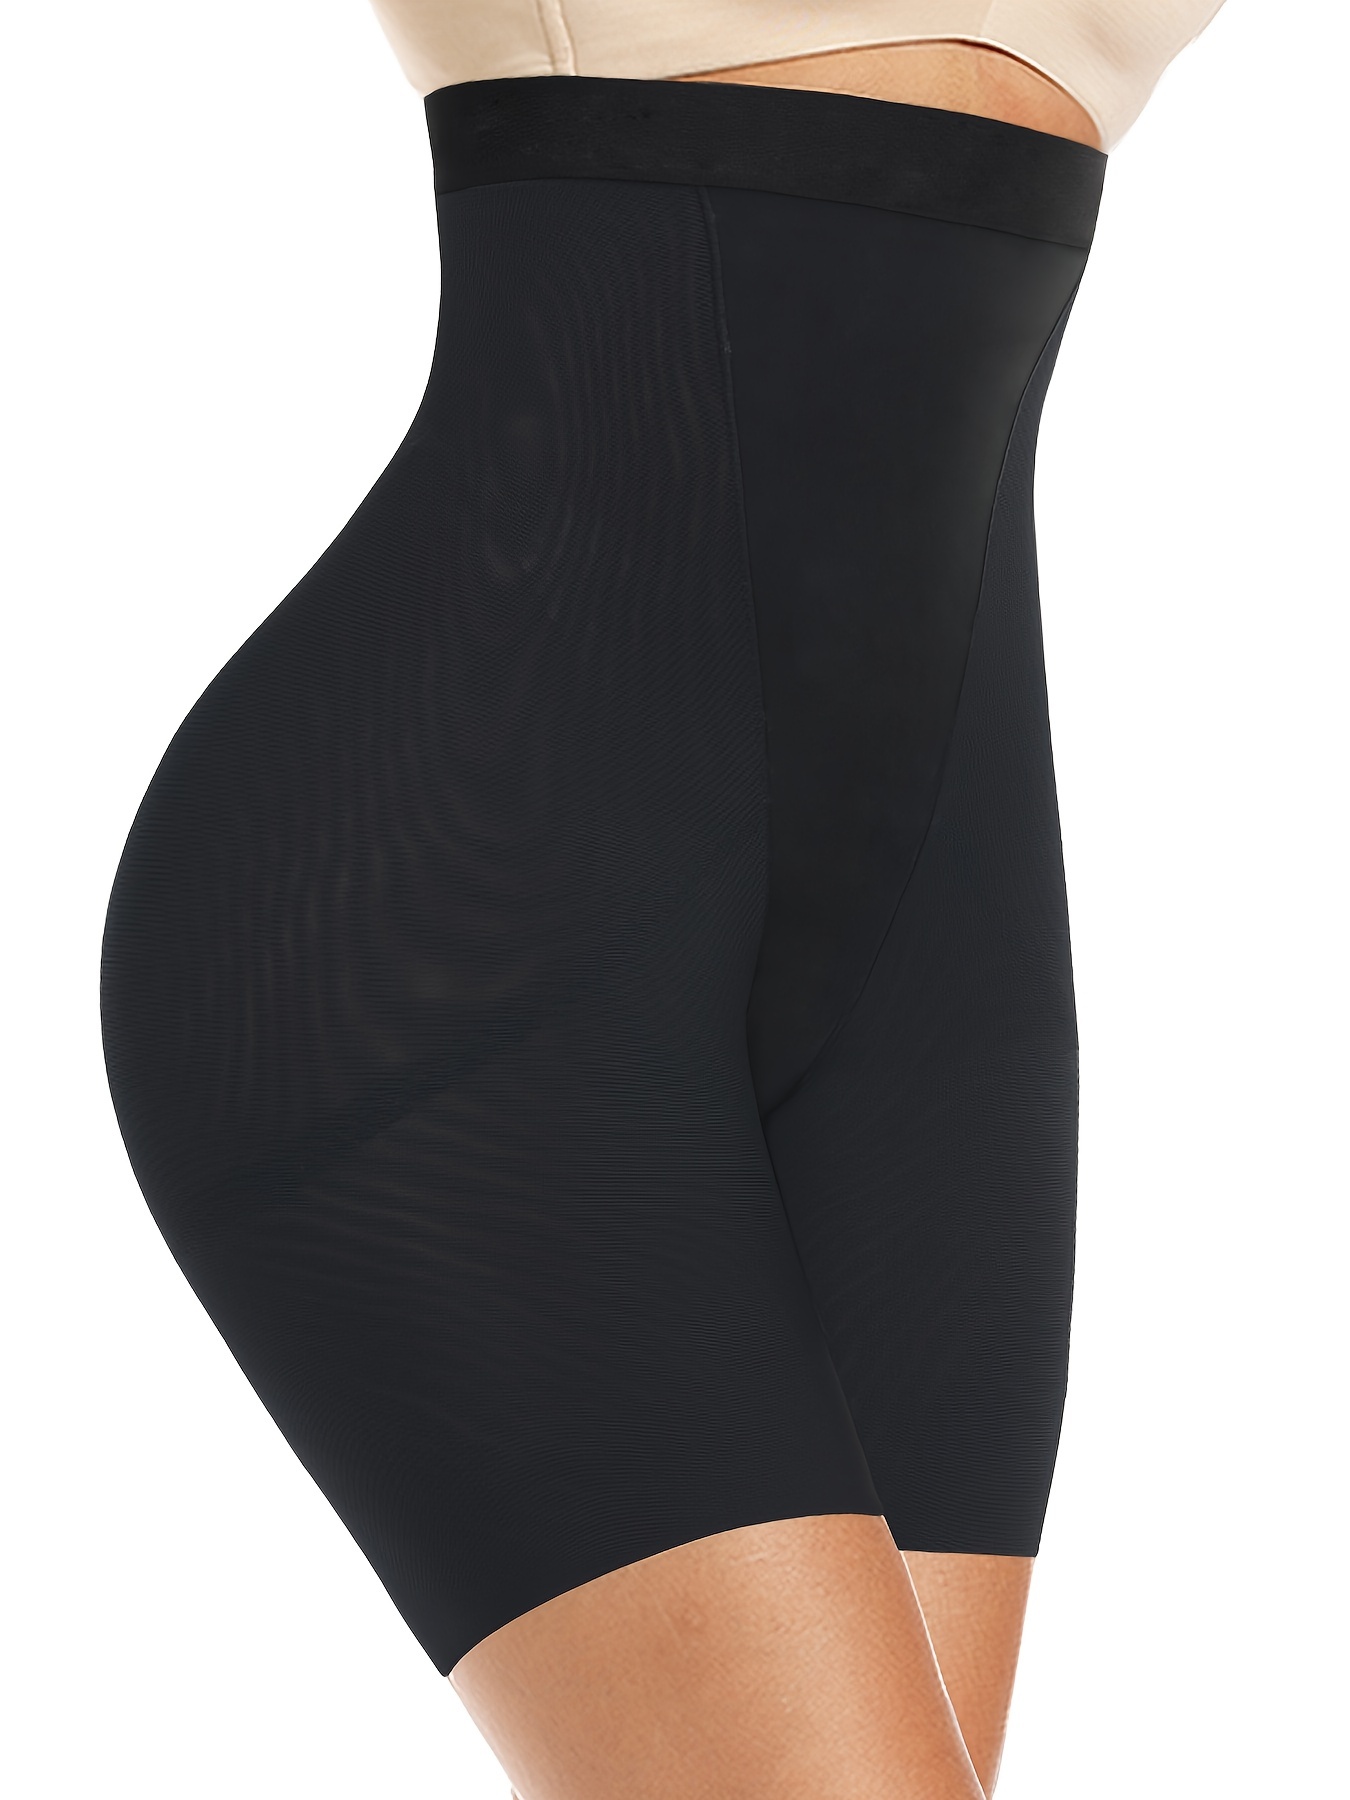 Seamless Shaping Panties, High Waist Comfy & Breathable Compression Panties  To Lift & Shape Buttocks, Women's Underwear & Shapewear